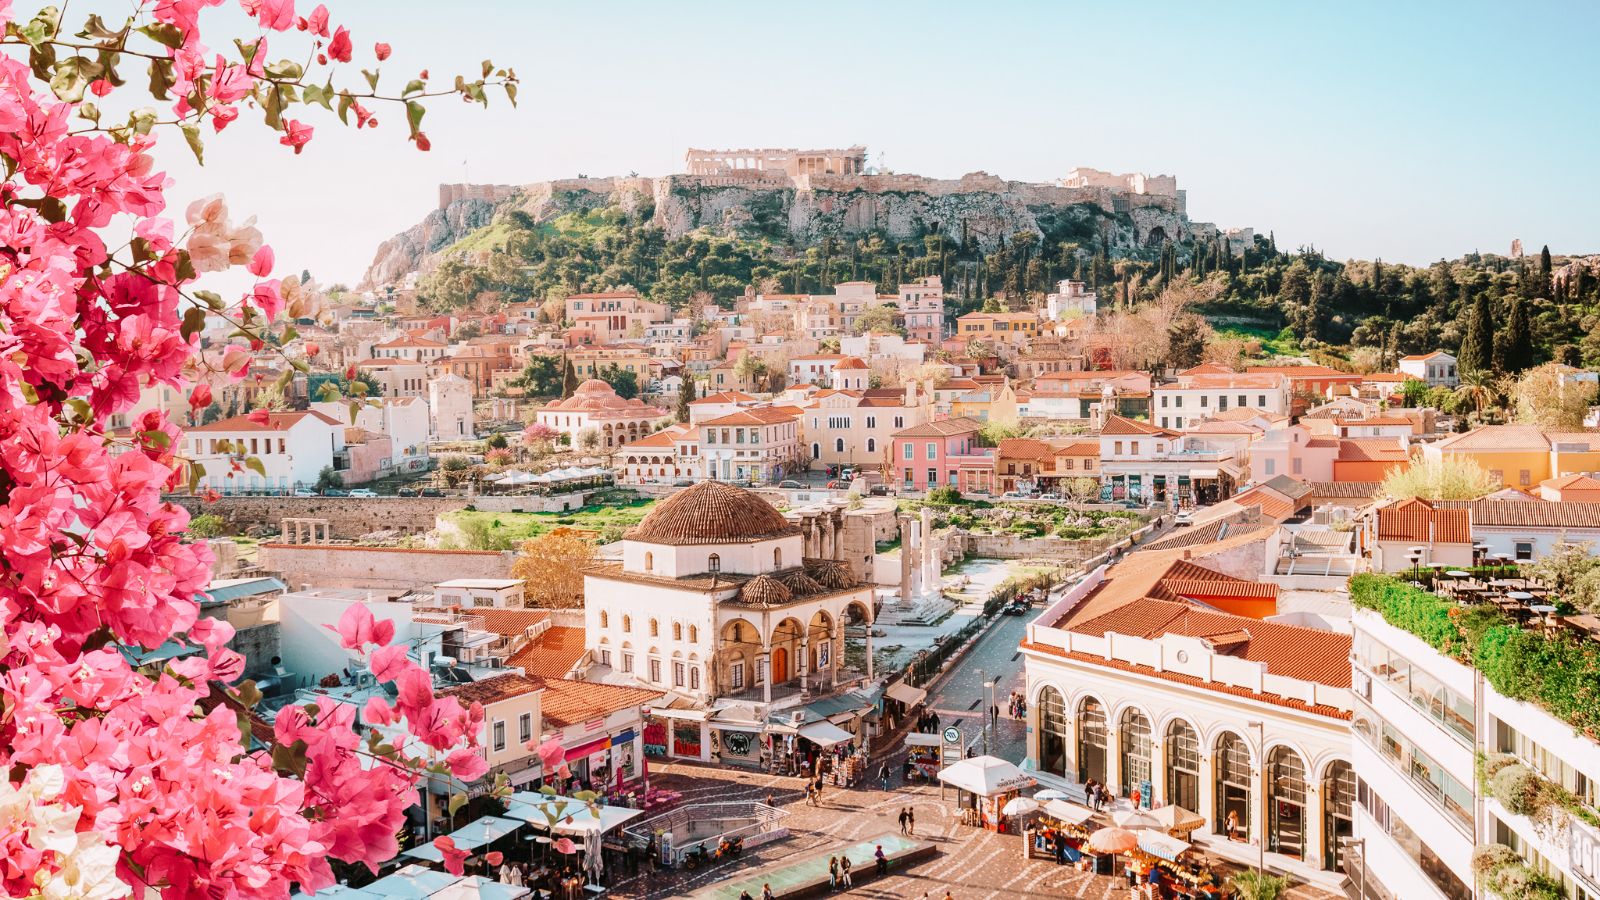 12 European Cities for Spring Athens, Spain